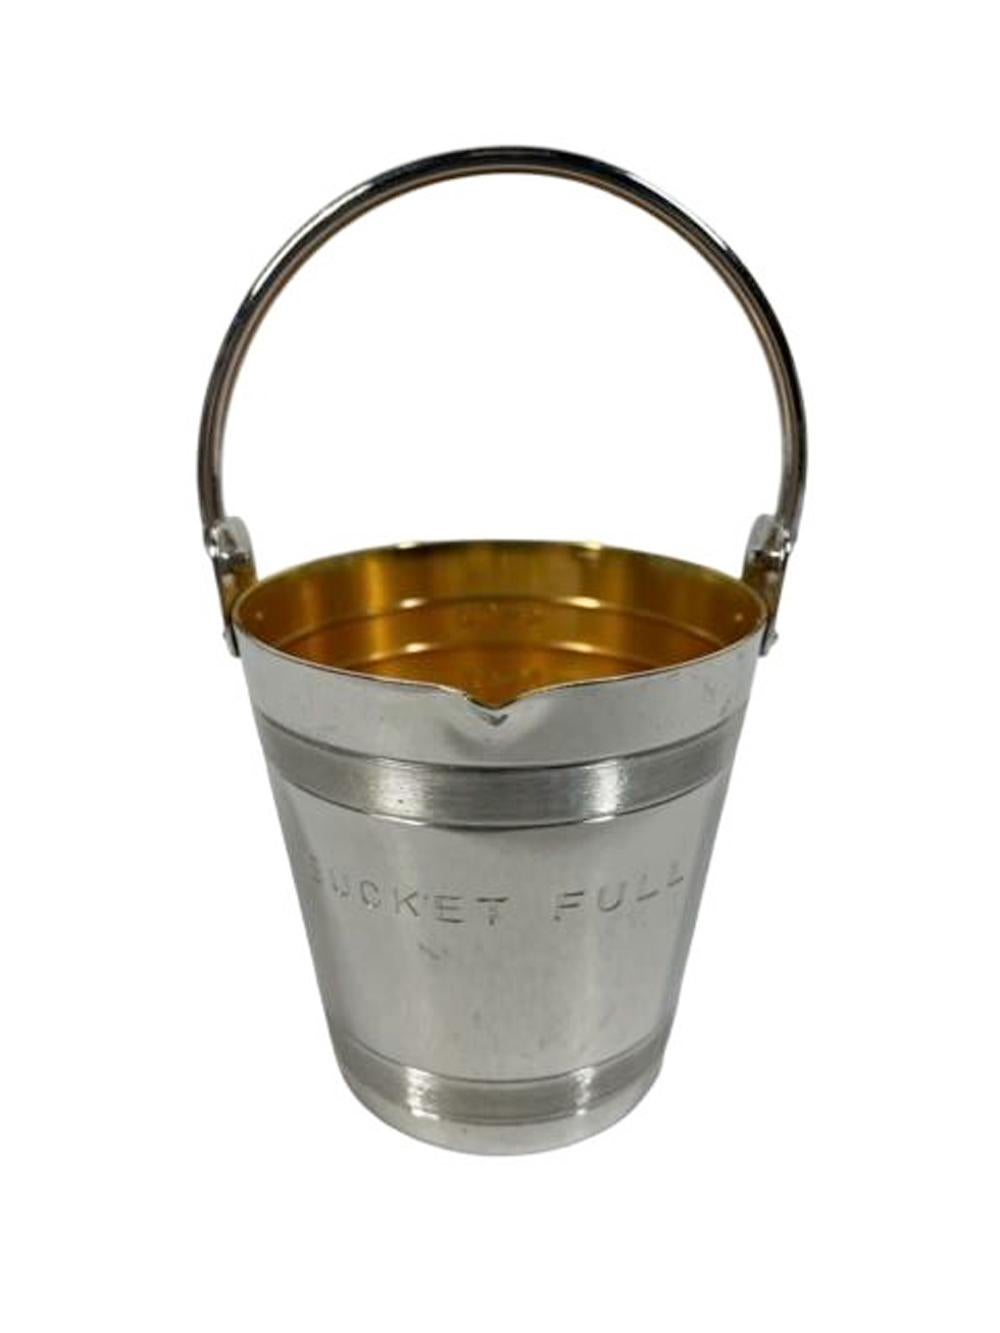 Hard to Find - Napier Art Deco Silver Plate "Bucket Full" 4oz Spirit Measure For Sale